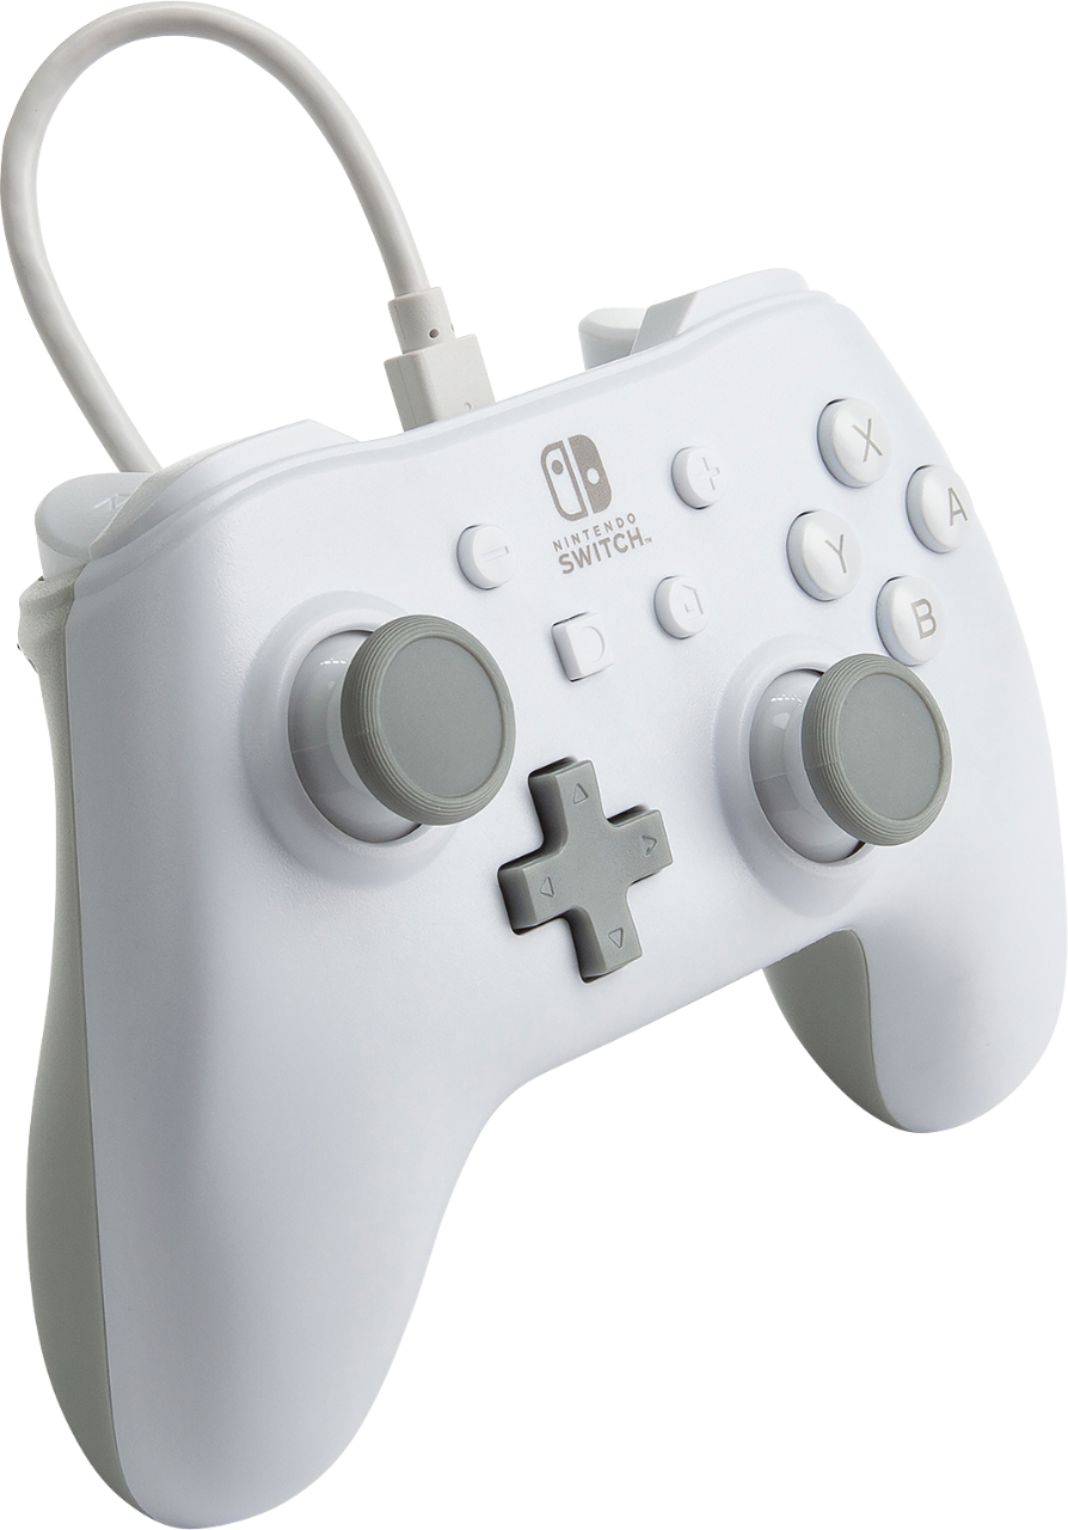 Angle View: PowerA Wired Controller for Nintendo Switch - White